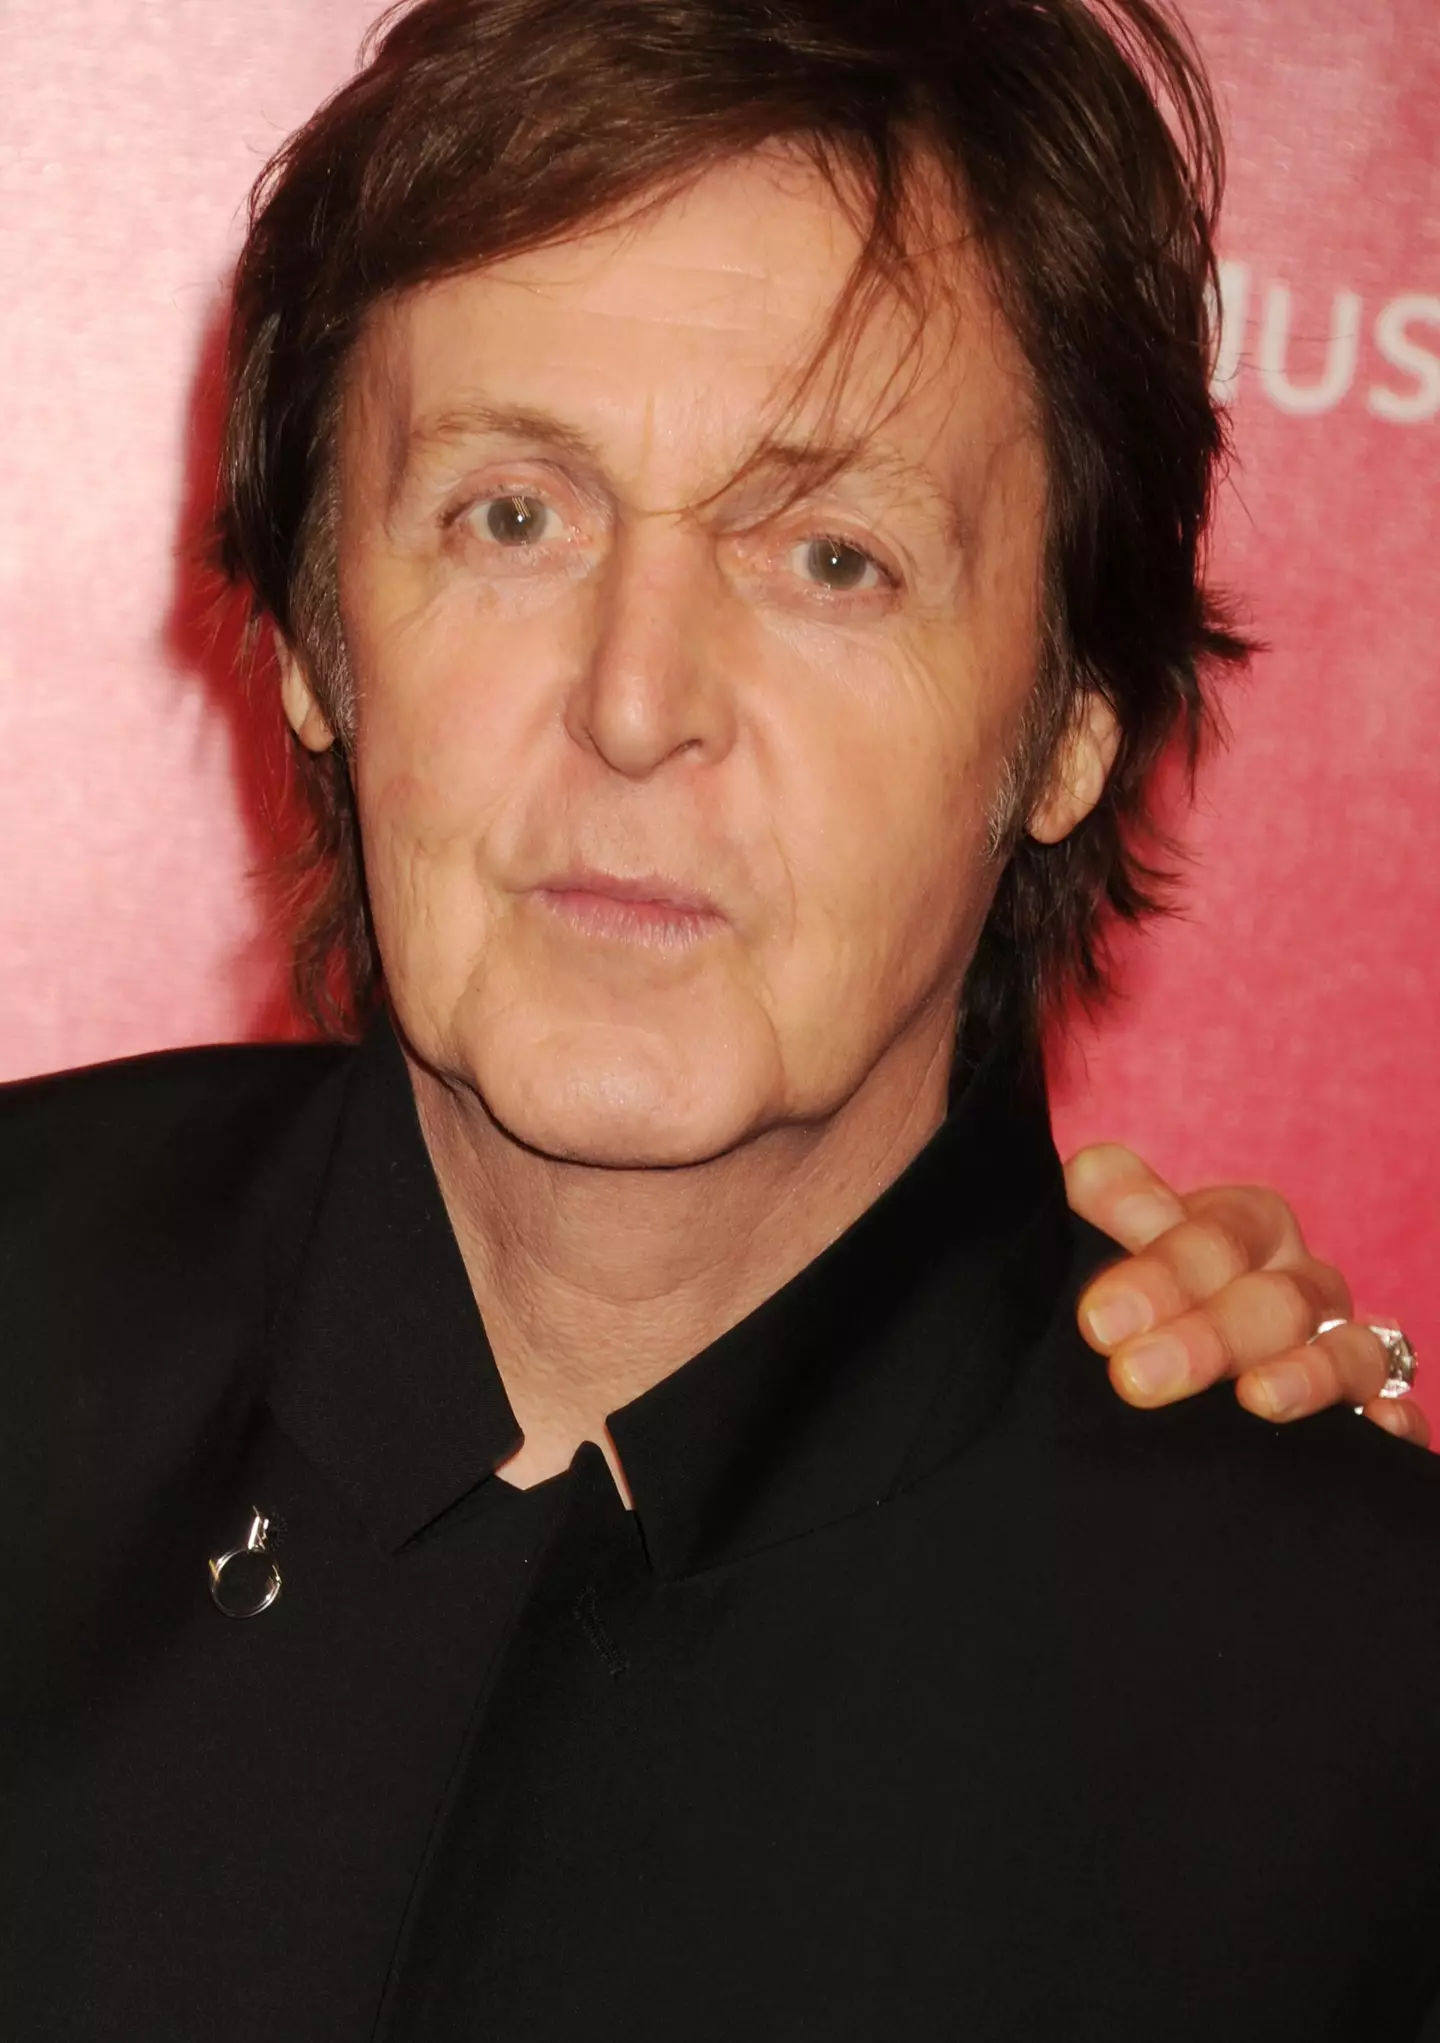 Paul McCartney was turned down by the Queen in favour of a Twin Peaks episode.